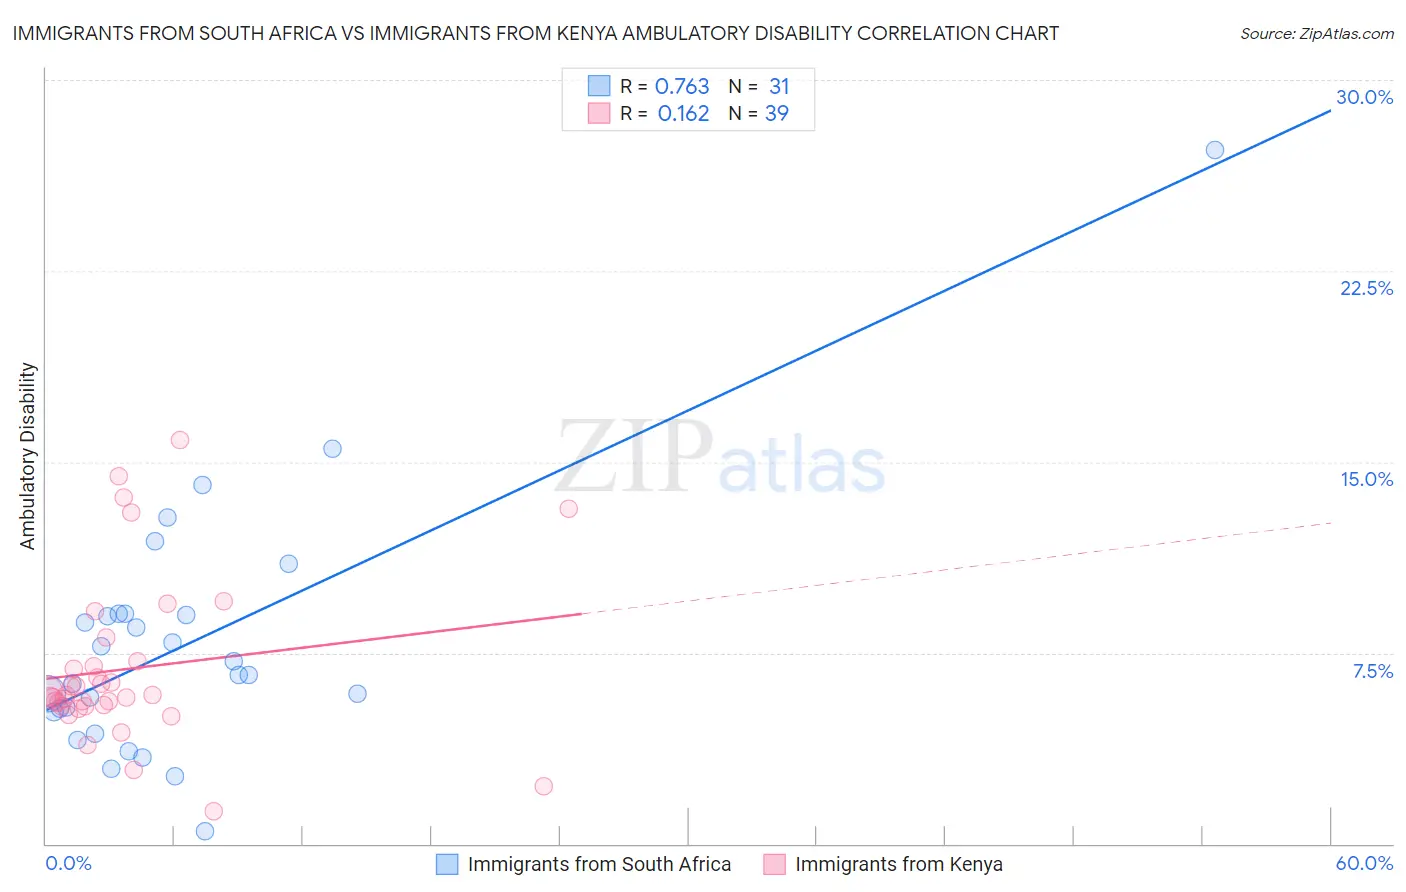 Immigrants from South Africa vs Immigrants from Kenya Ambulatory Disability